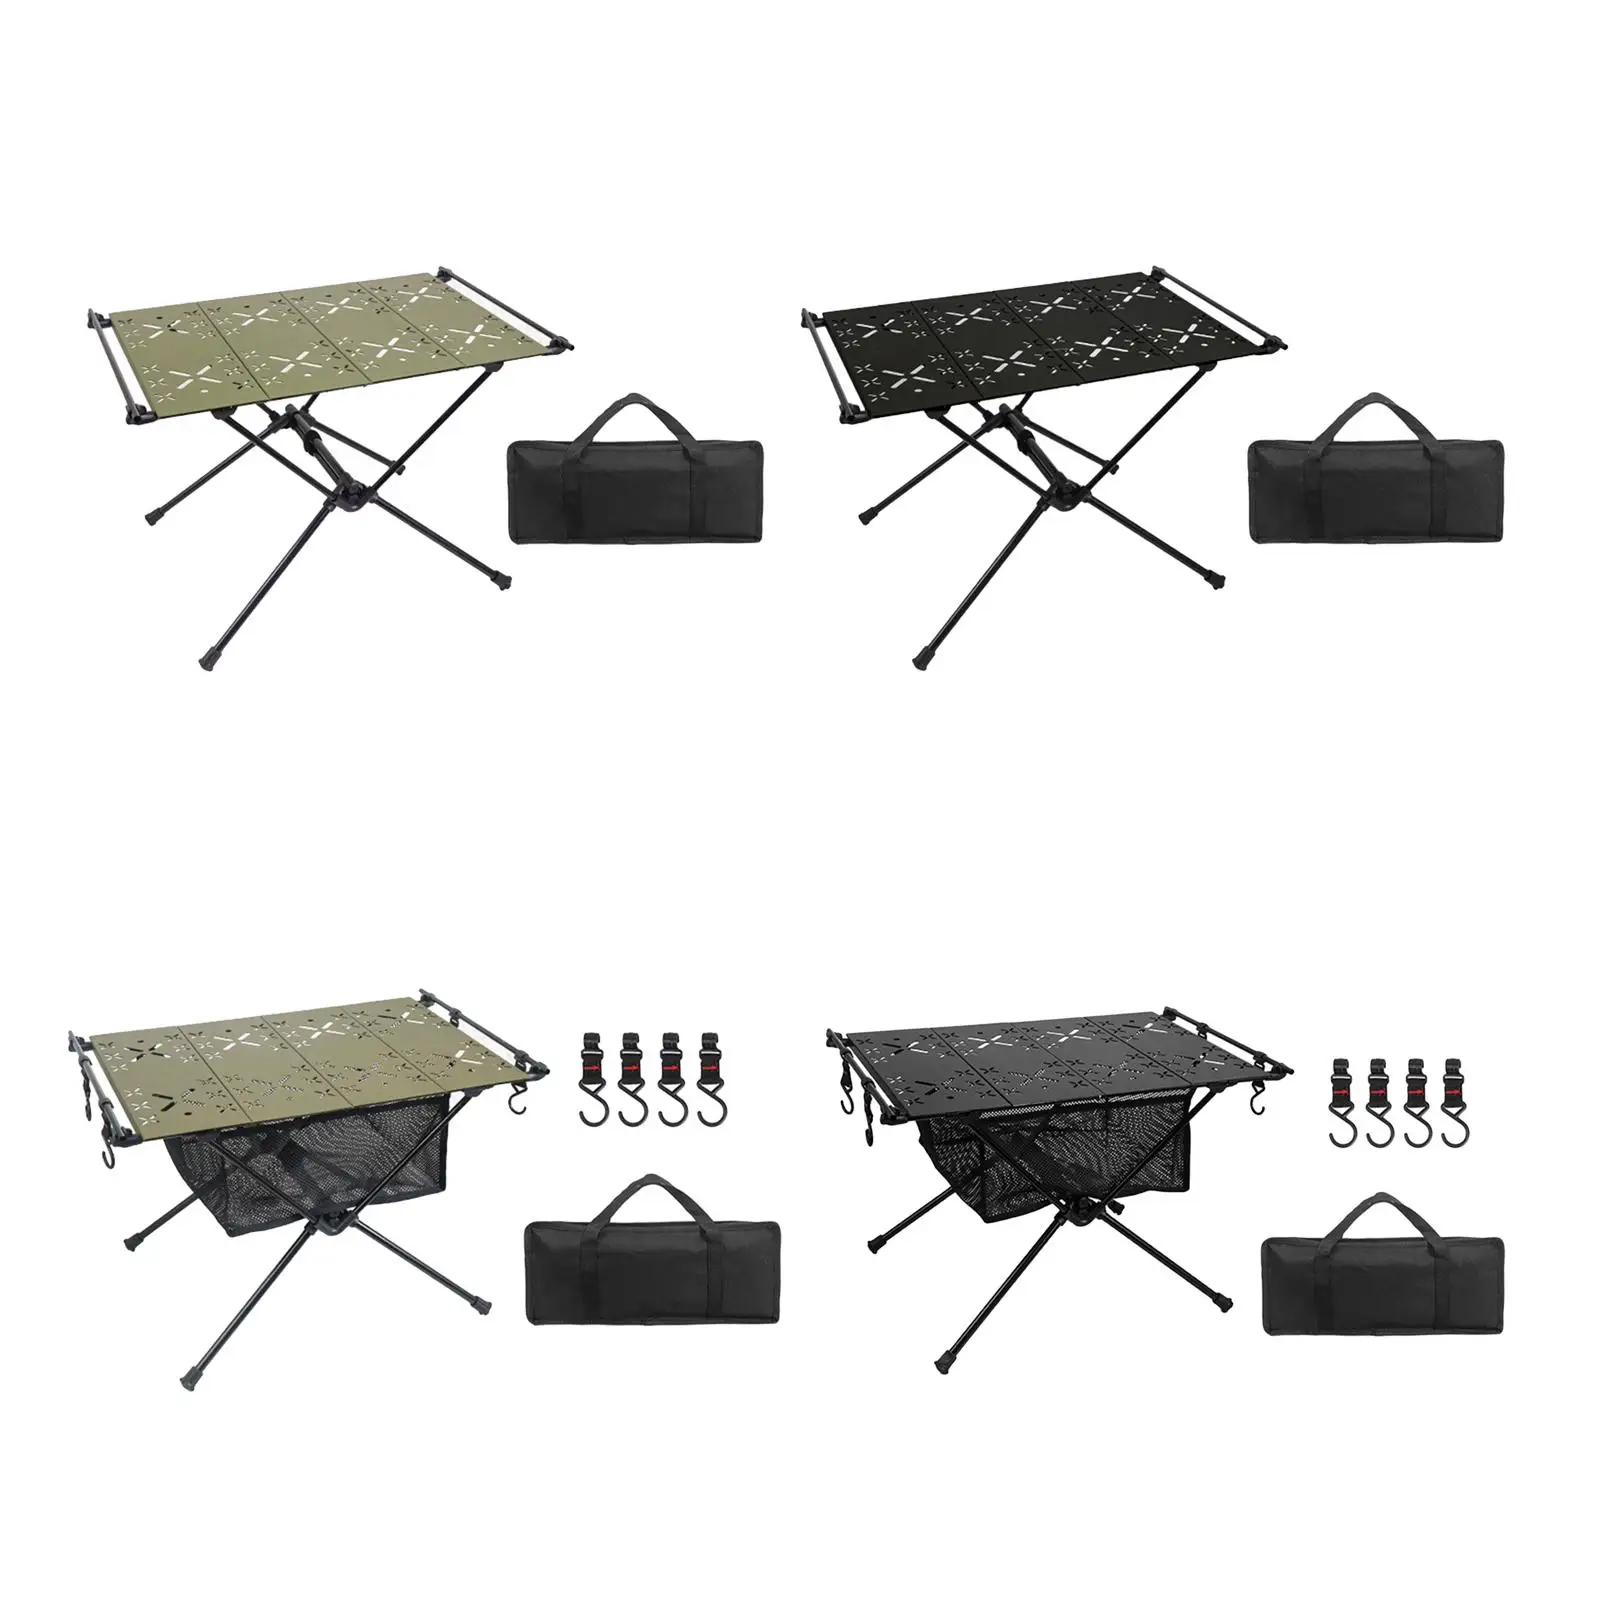 Foldable Camping Table Outdoor Foldable Table Beach Table Ultralight Desk for Backyard Backpacking Picnic Yard Travel